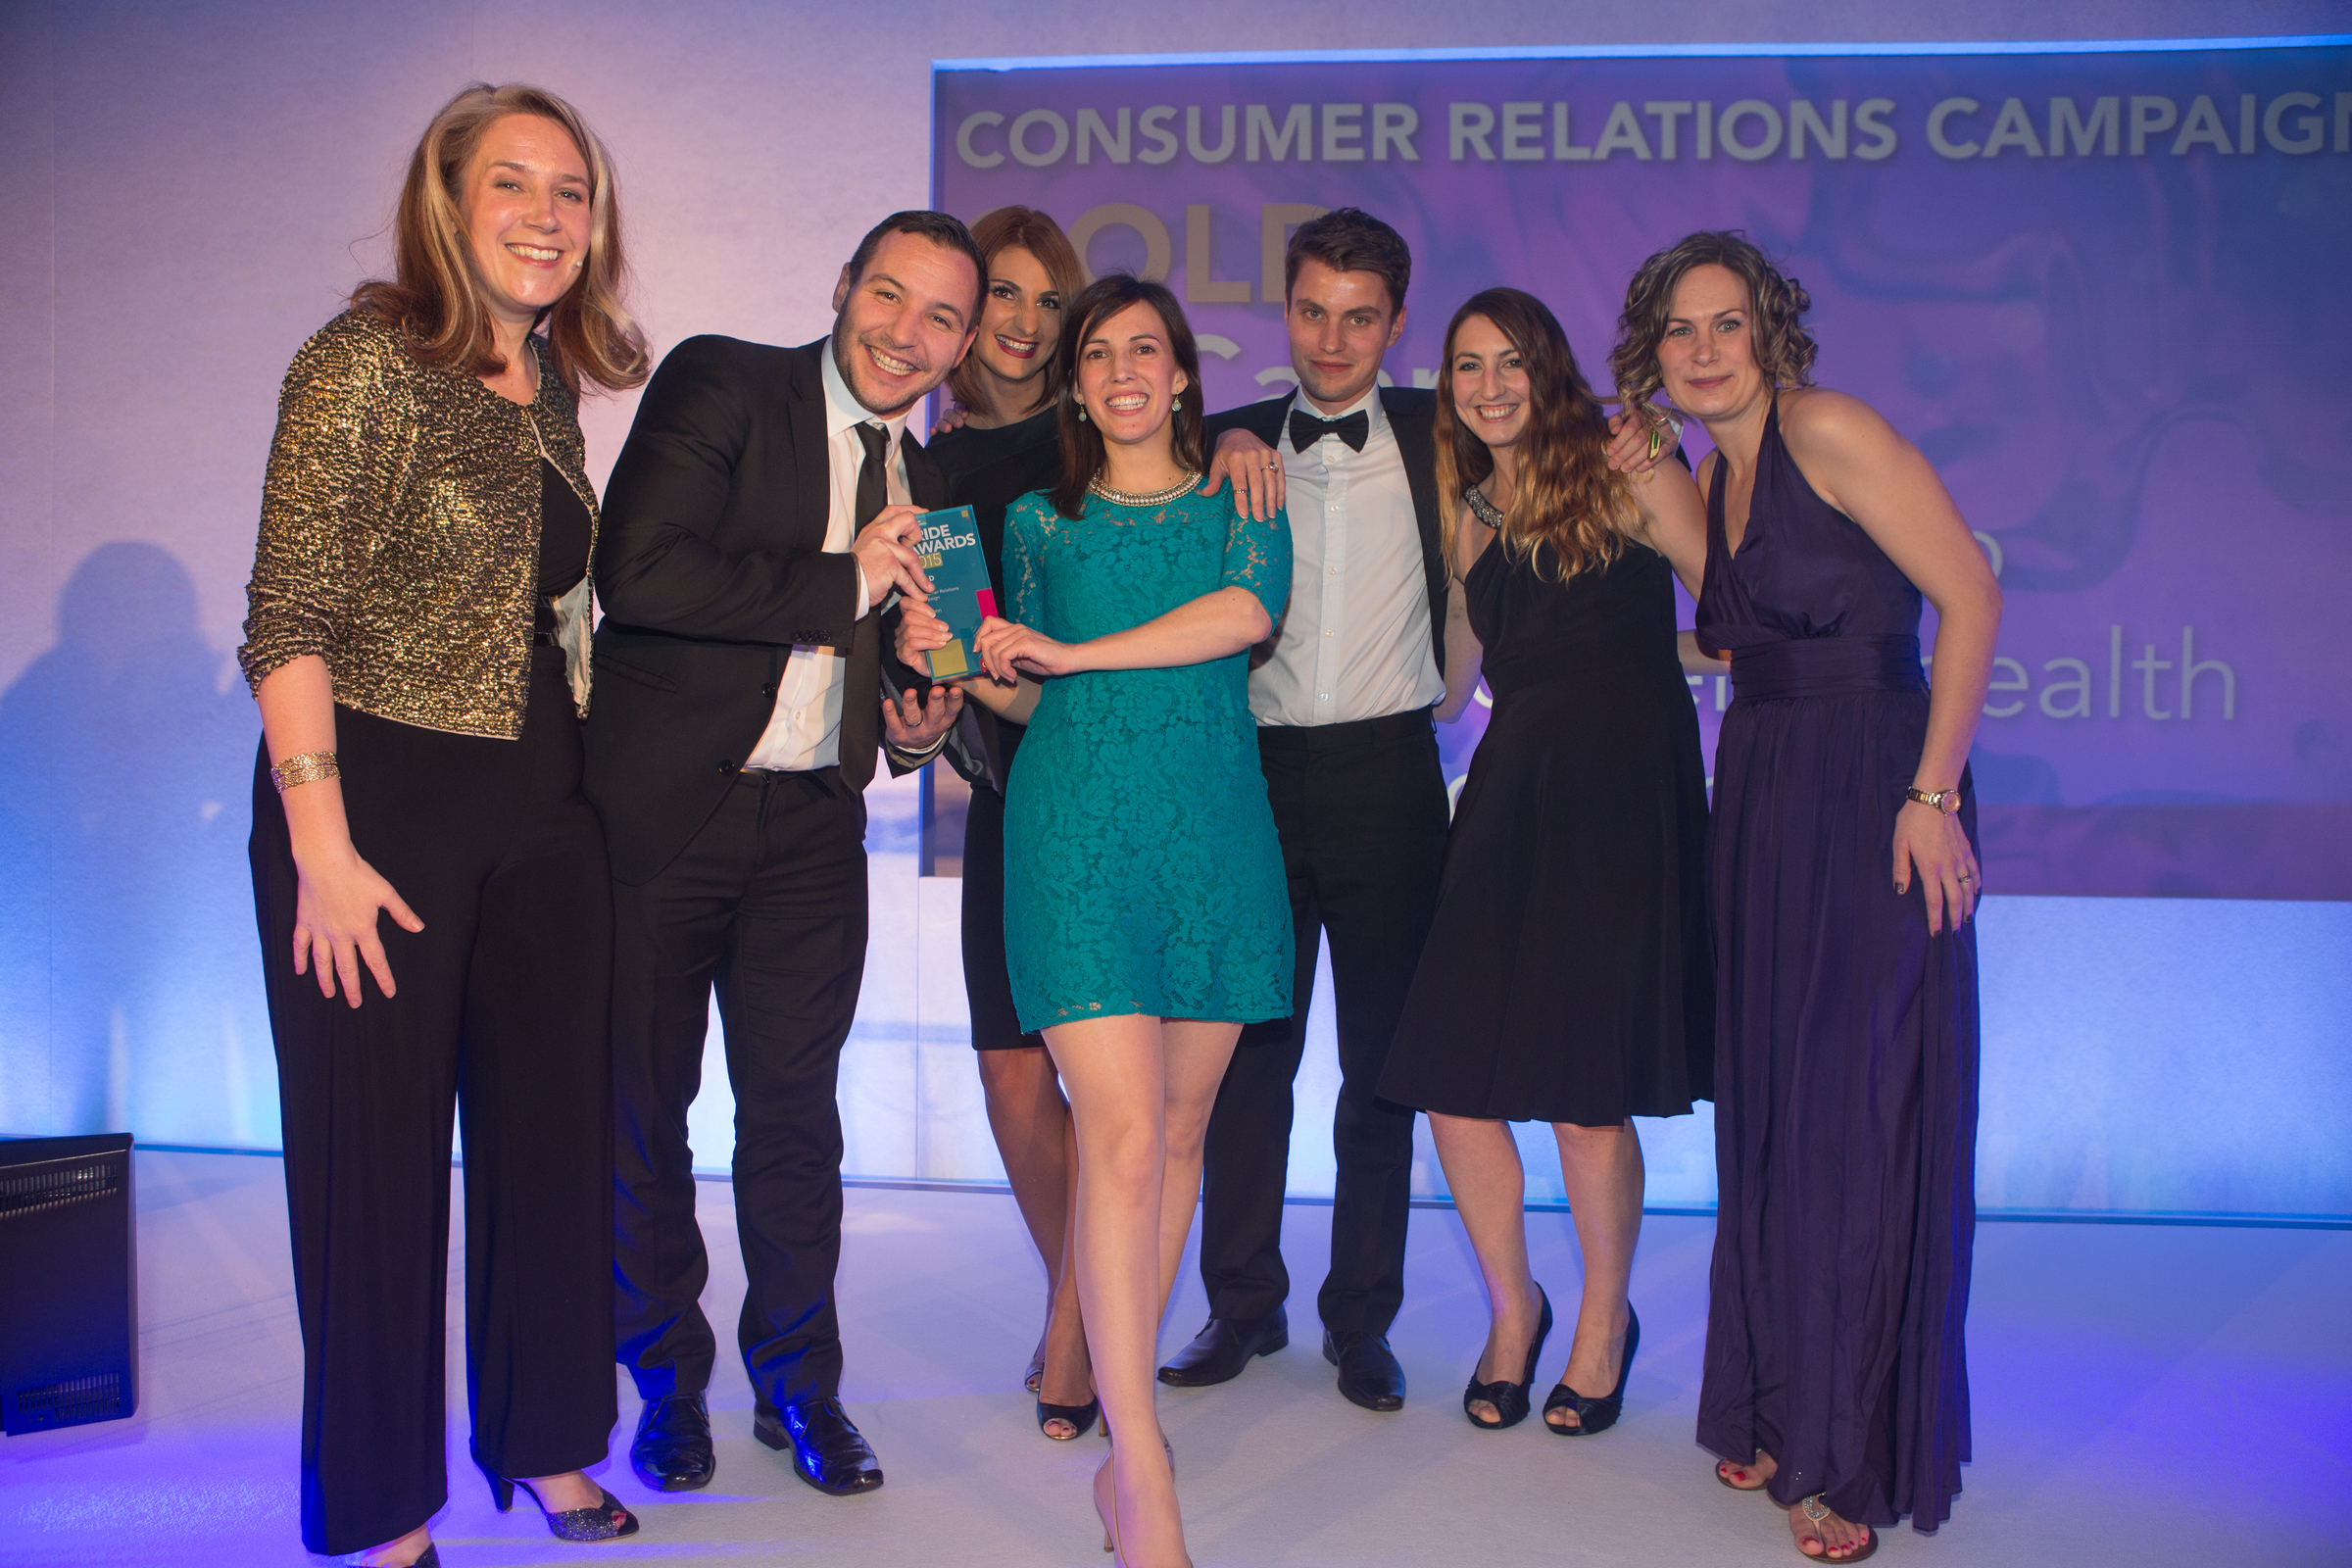 McCann Bristol hits the target twice at PR awards for archery and healthcare campaigns